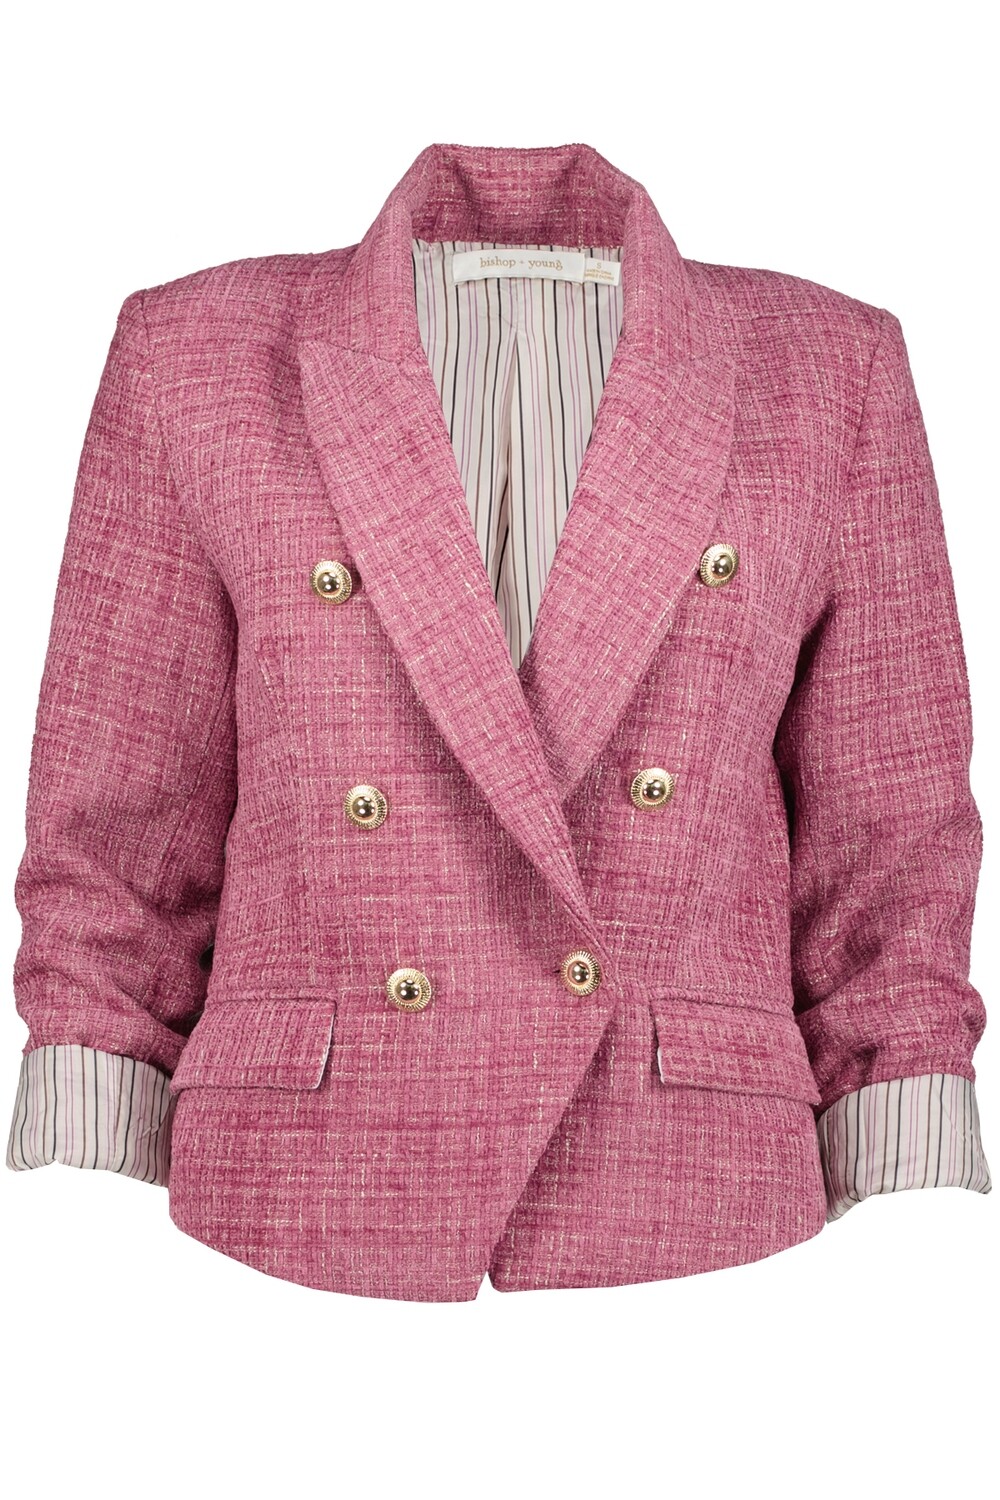 FONTAINE TWEED BLAZER, Color: Rose, Size: X-Small